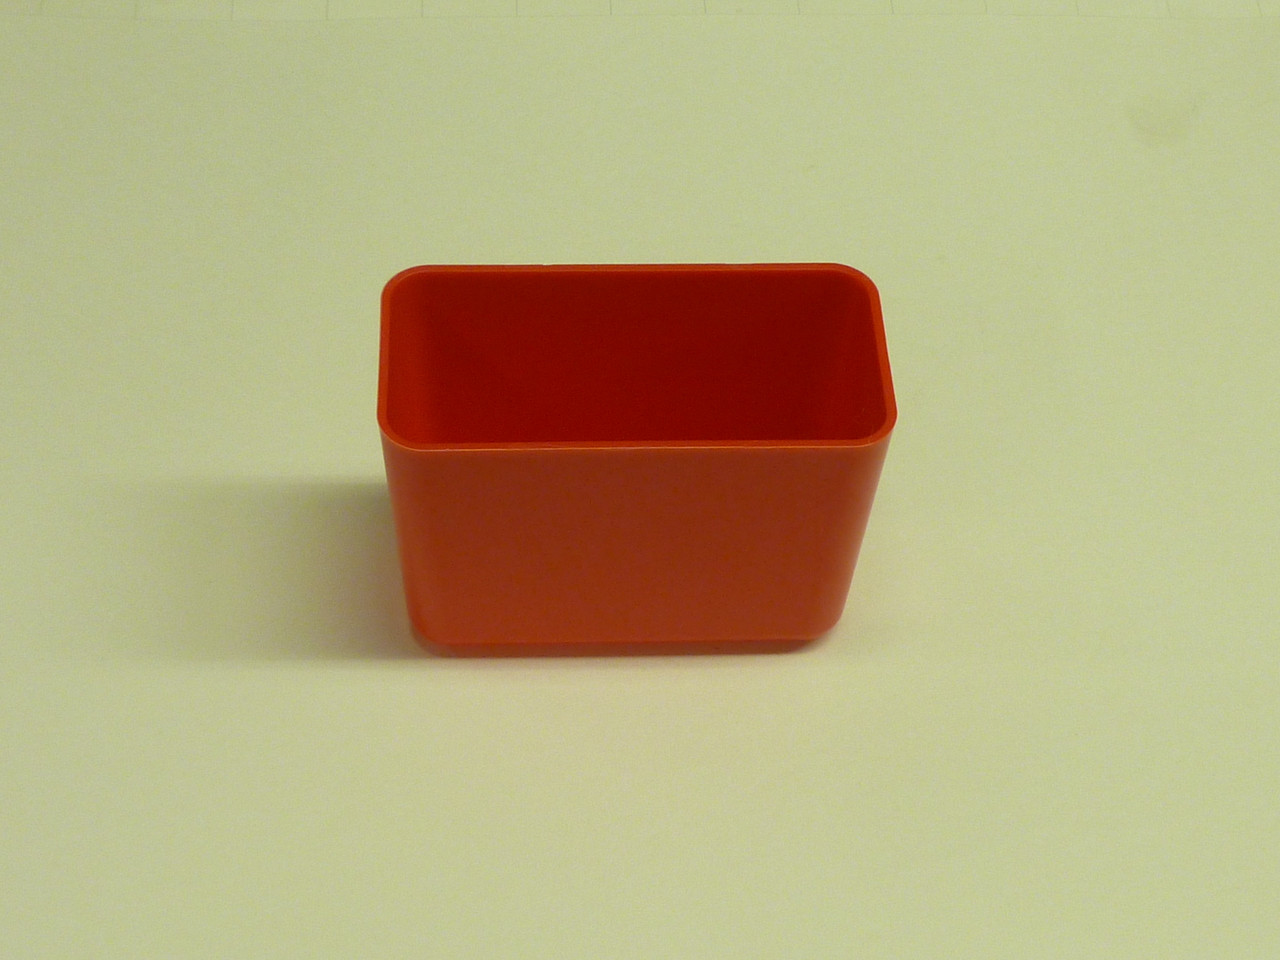 Buy Plastic Boxes Online at $4.10 - JL Smith & Co